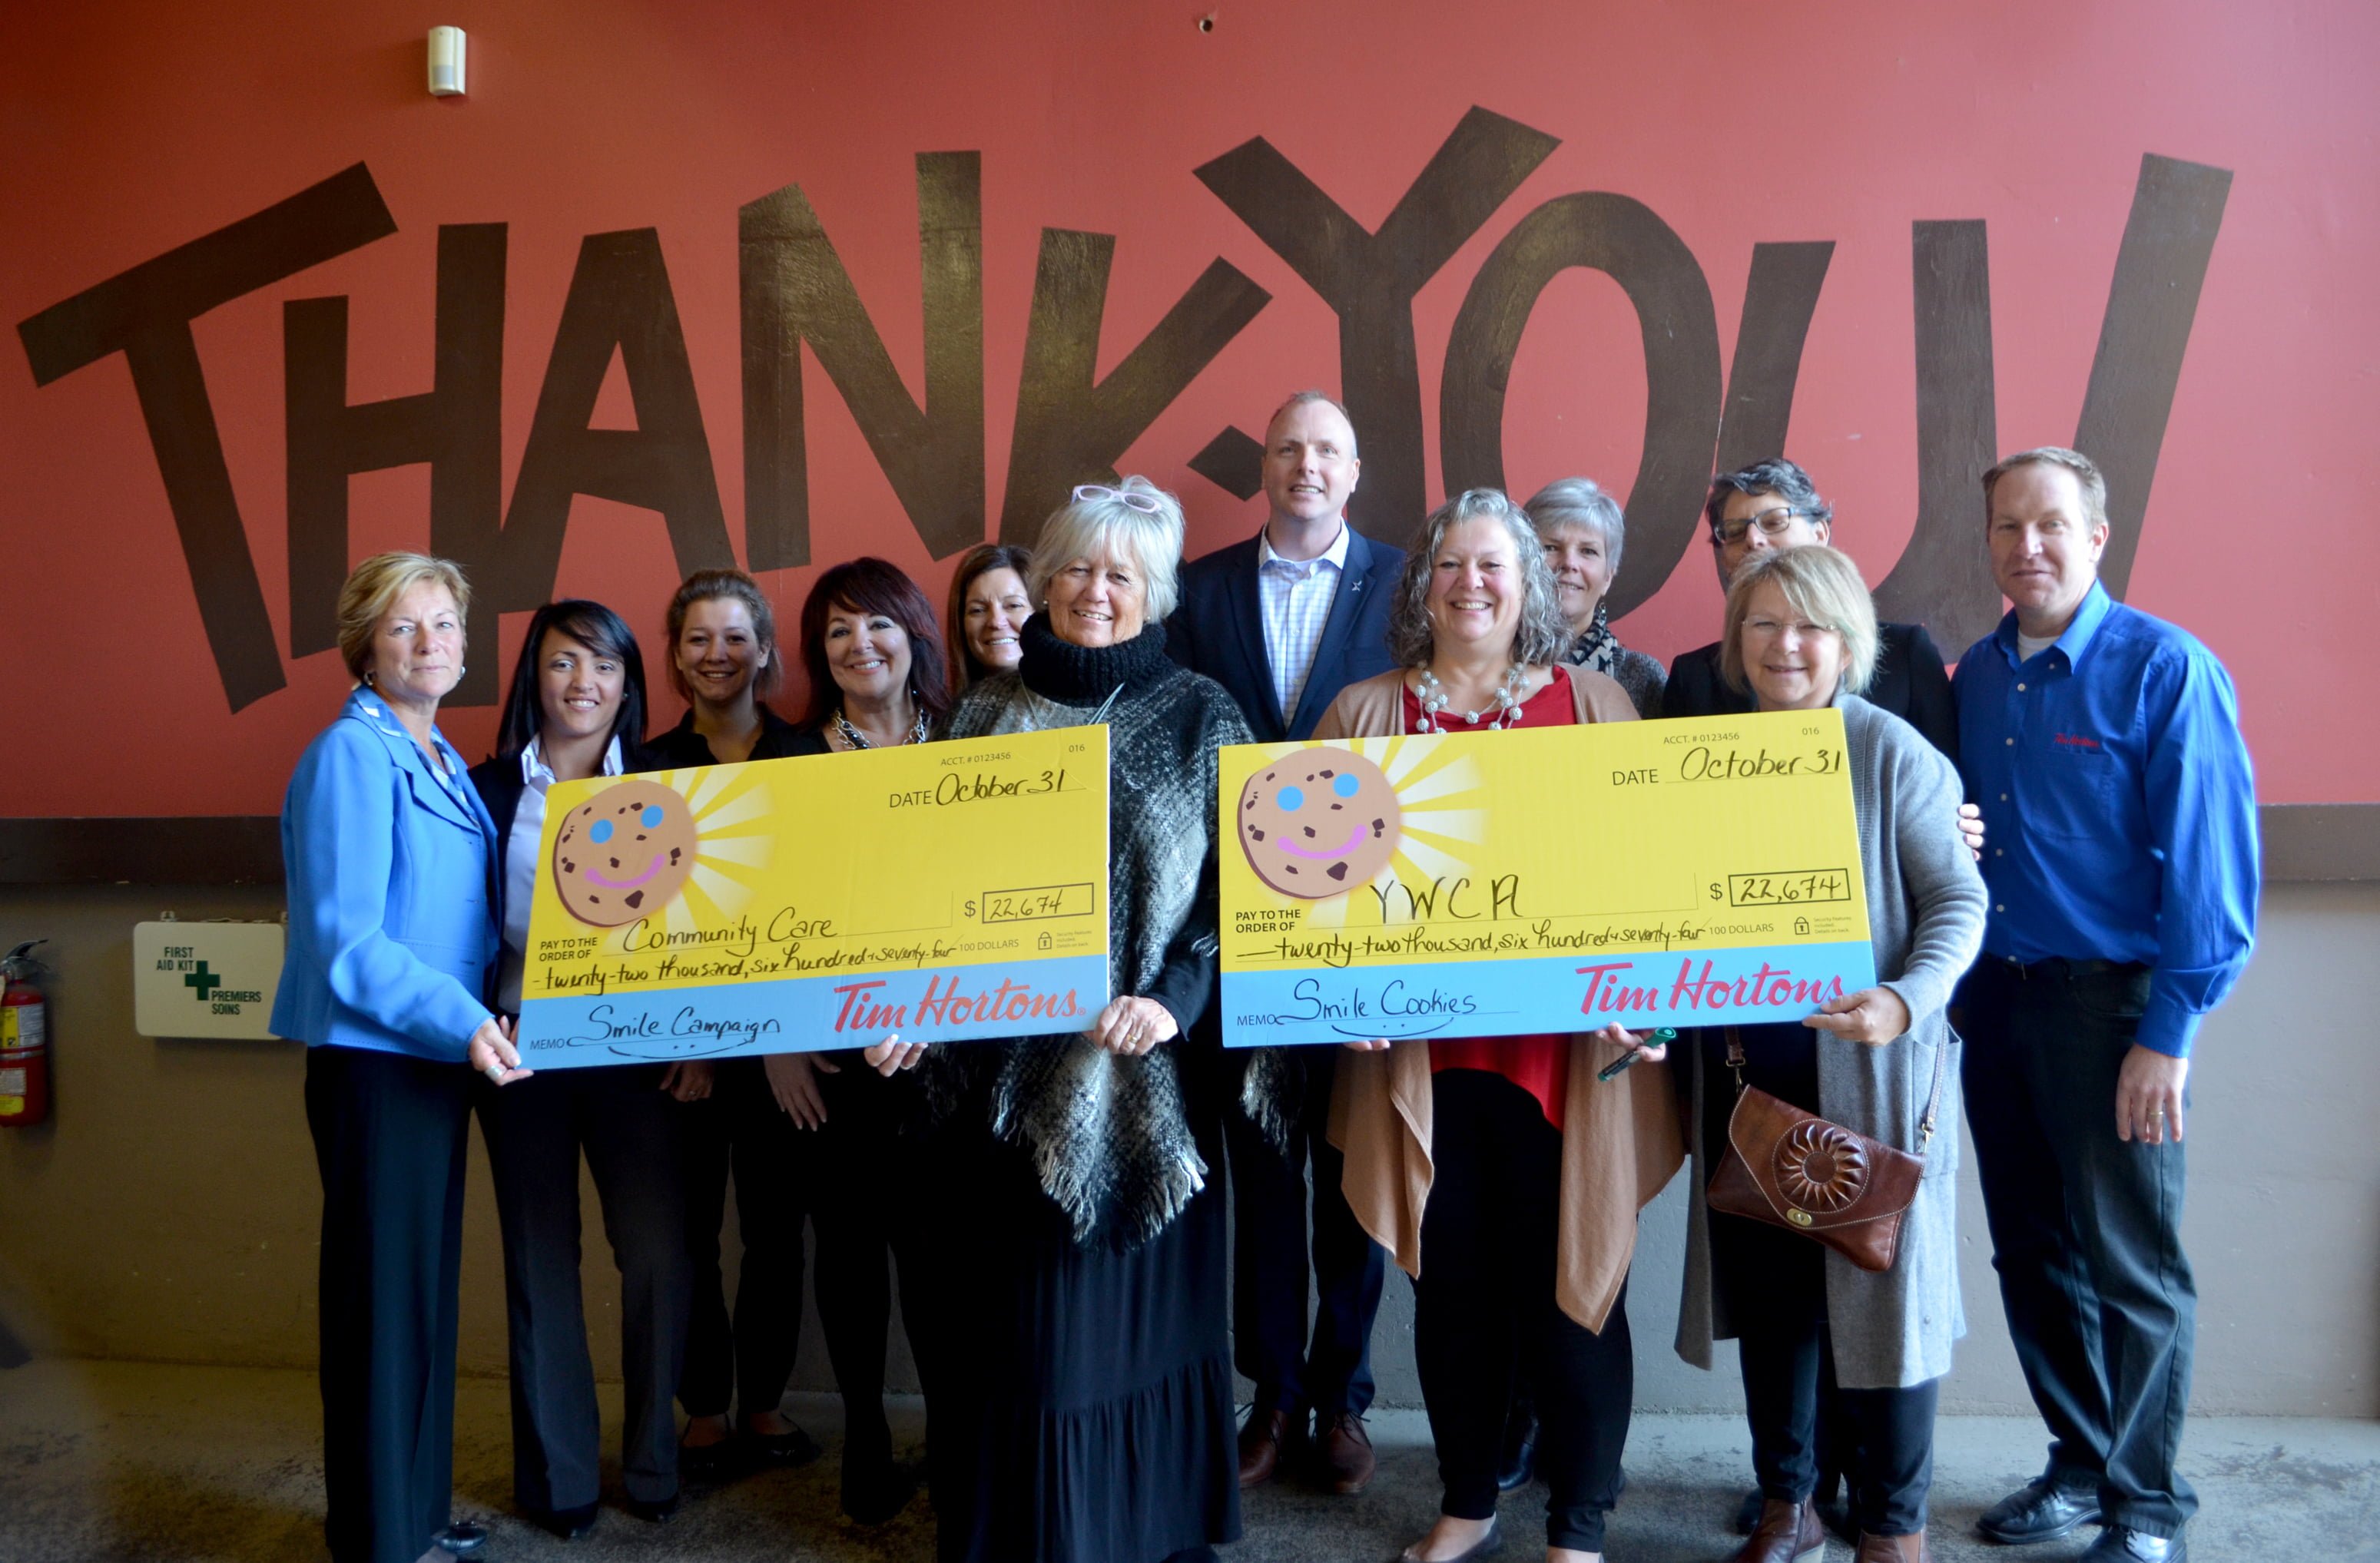 Tim Horton Franchise owners presenting the cheque for the proceeds from the Smile Cookie Campaign. Receiving the cheque are board members from both charities; CEO Betty Lou Souter of Community Care; Executive Director Elisabeth Zimmerman from the YWCA; Laura Byers, Fund Development Officer, Community Care; Nicki Inch, Fund Developer, YWCA.